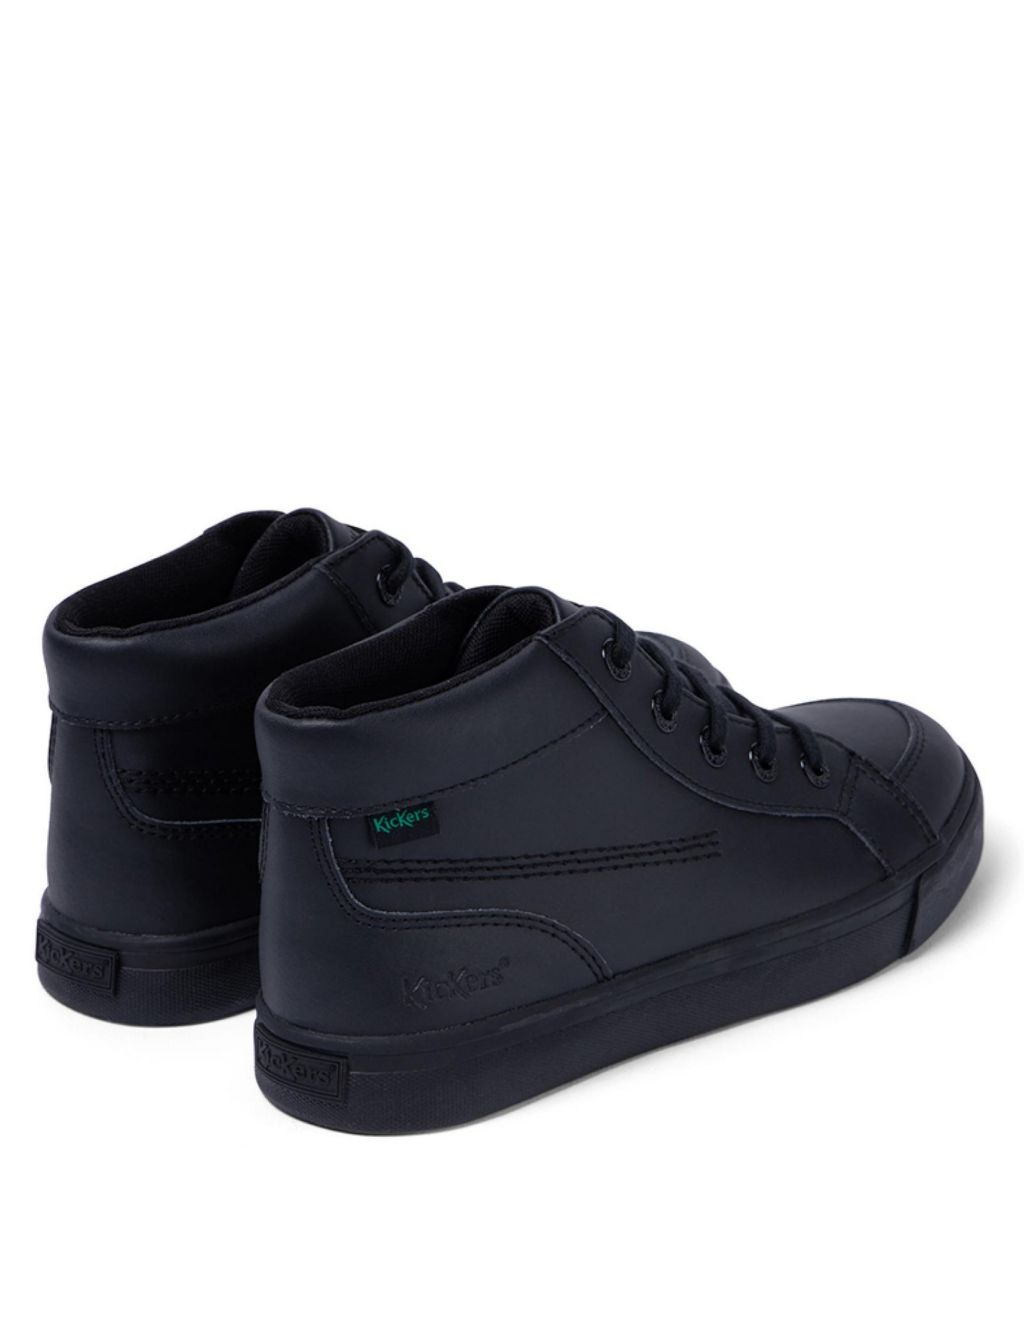 Kids' Leather High Top School Shoes image 4